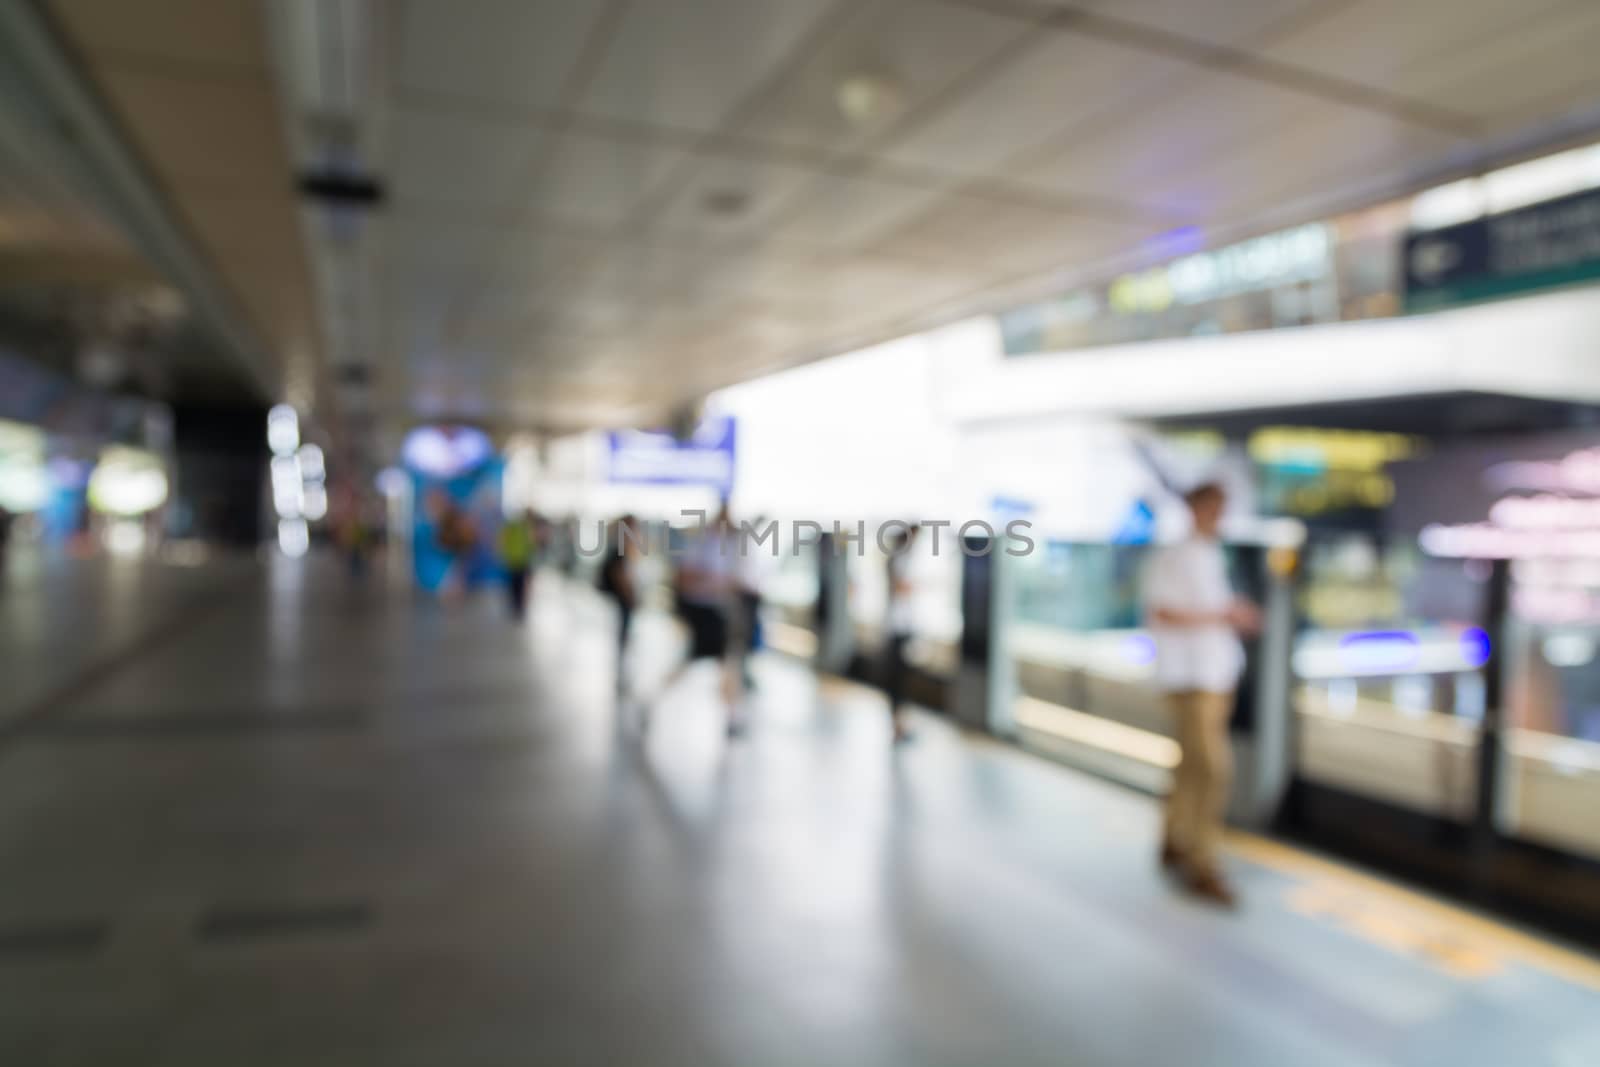 Background of Skytrain or City Train Station, Abstract Blur or Defocus